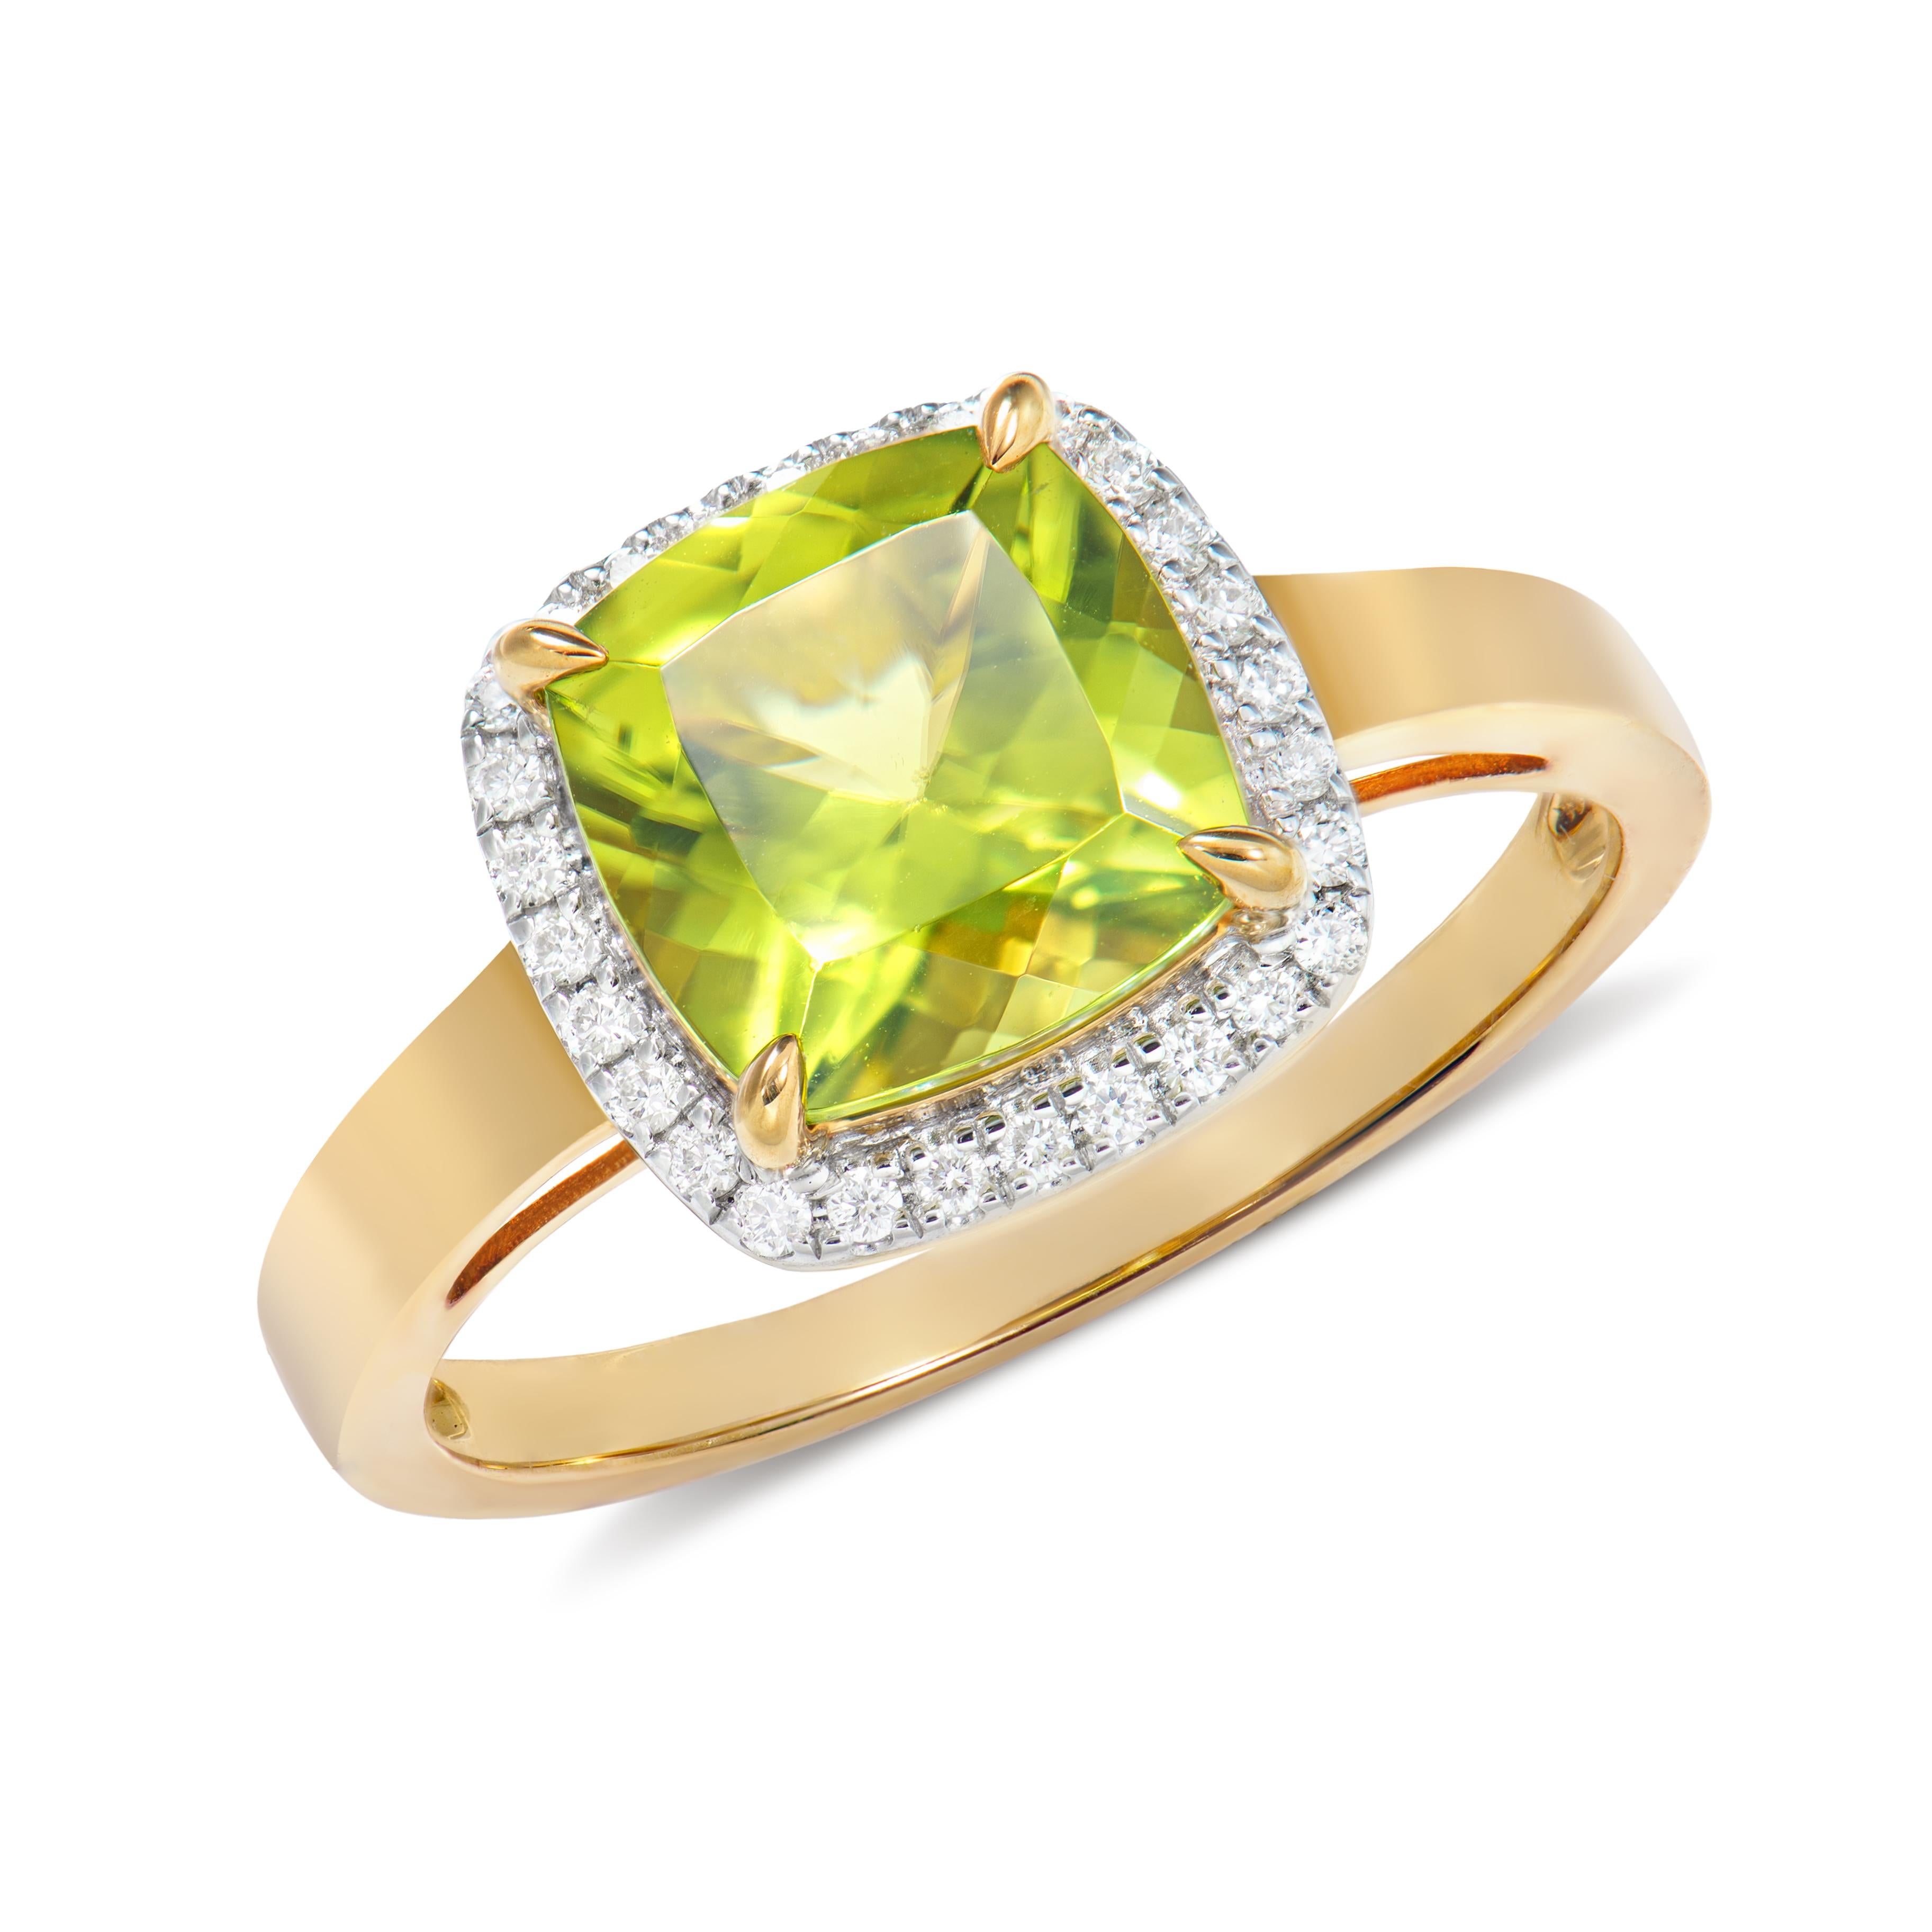 Presented A lovely collection of gems, including Amethyst, Peridot, Rhodolite, Sky Blue Topaz, Swiss Blue Topaz and Morganite is perfect for people who value quality and want to wear it to any occasion or celebration. The yellow gold Peridot ring